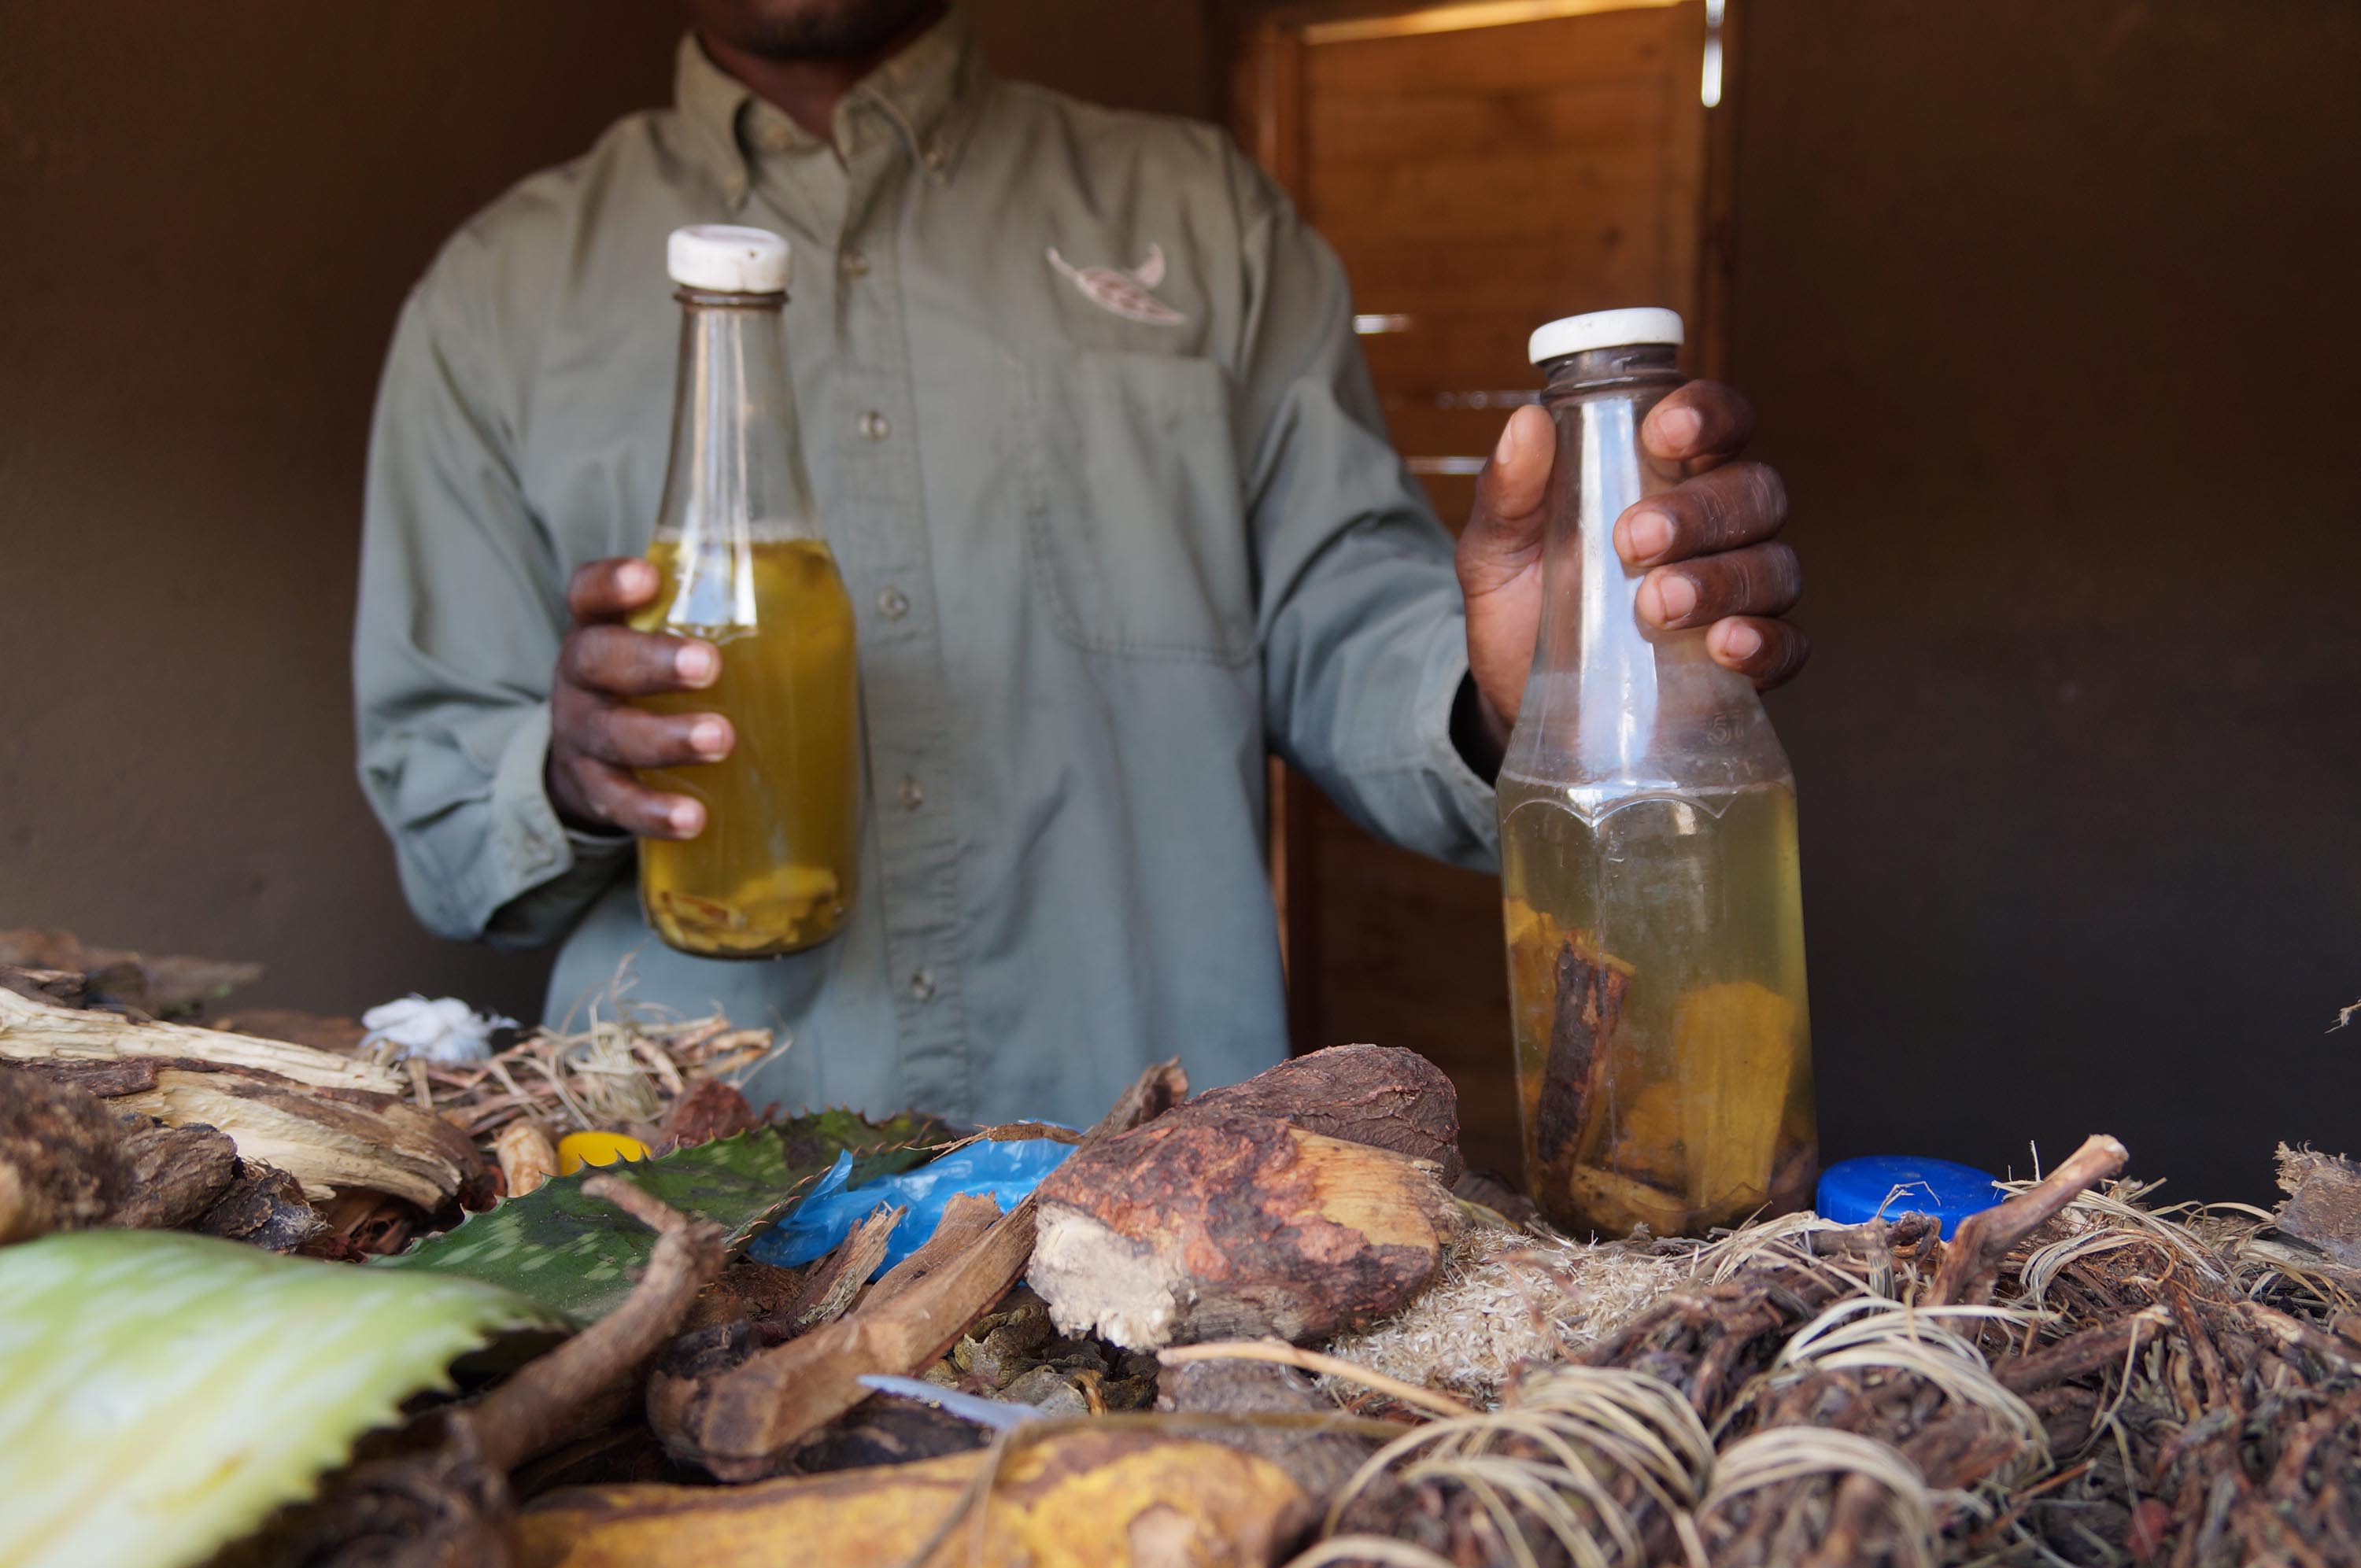 A traditional healer shows some of the abortion-inducing concoctions.